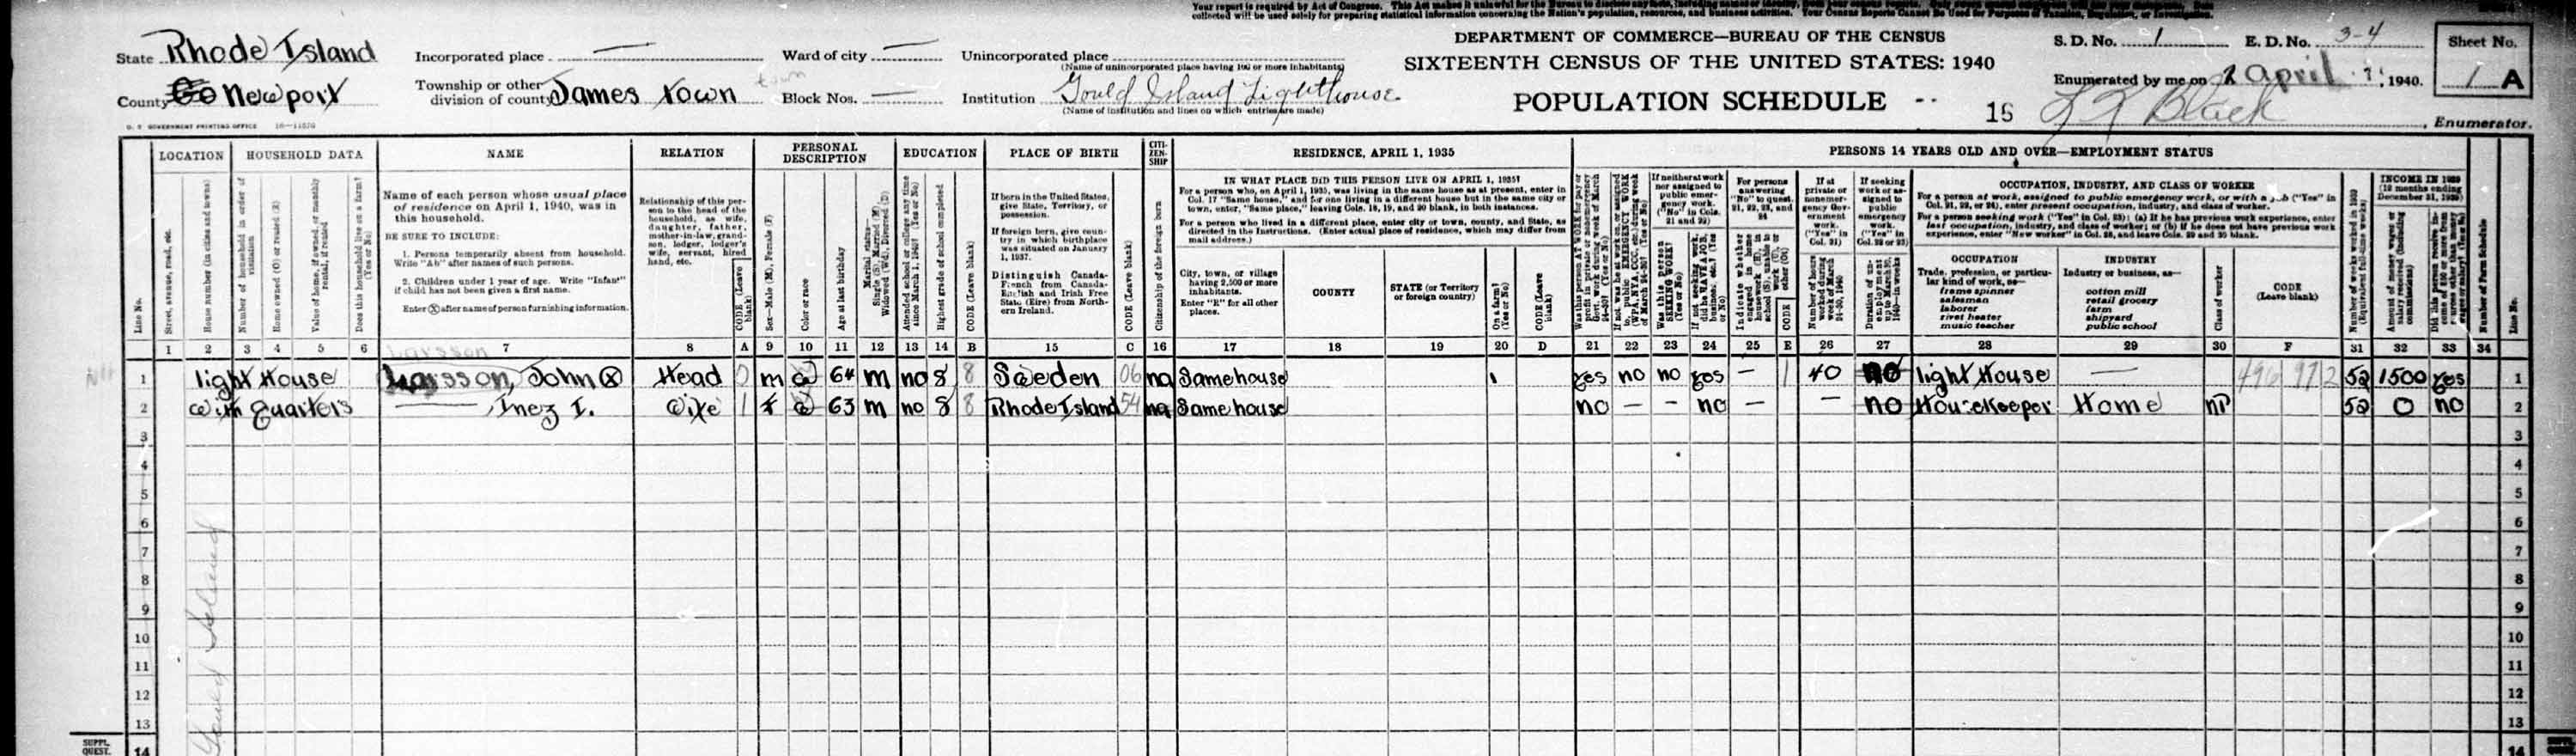 Gould Island Lighthouse 1940 Census